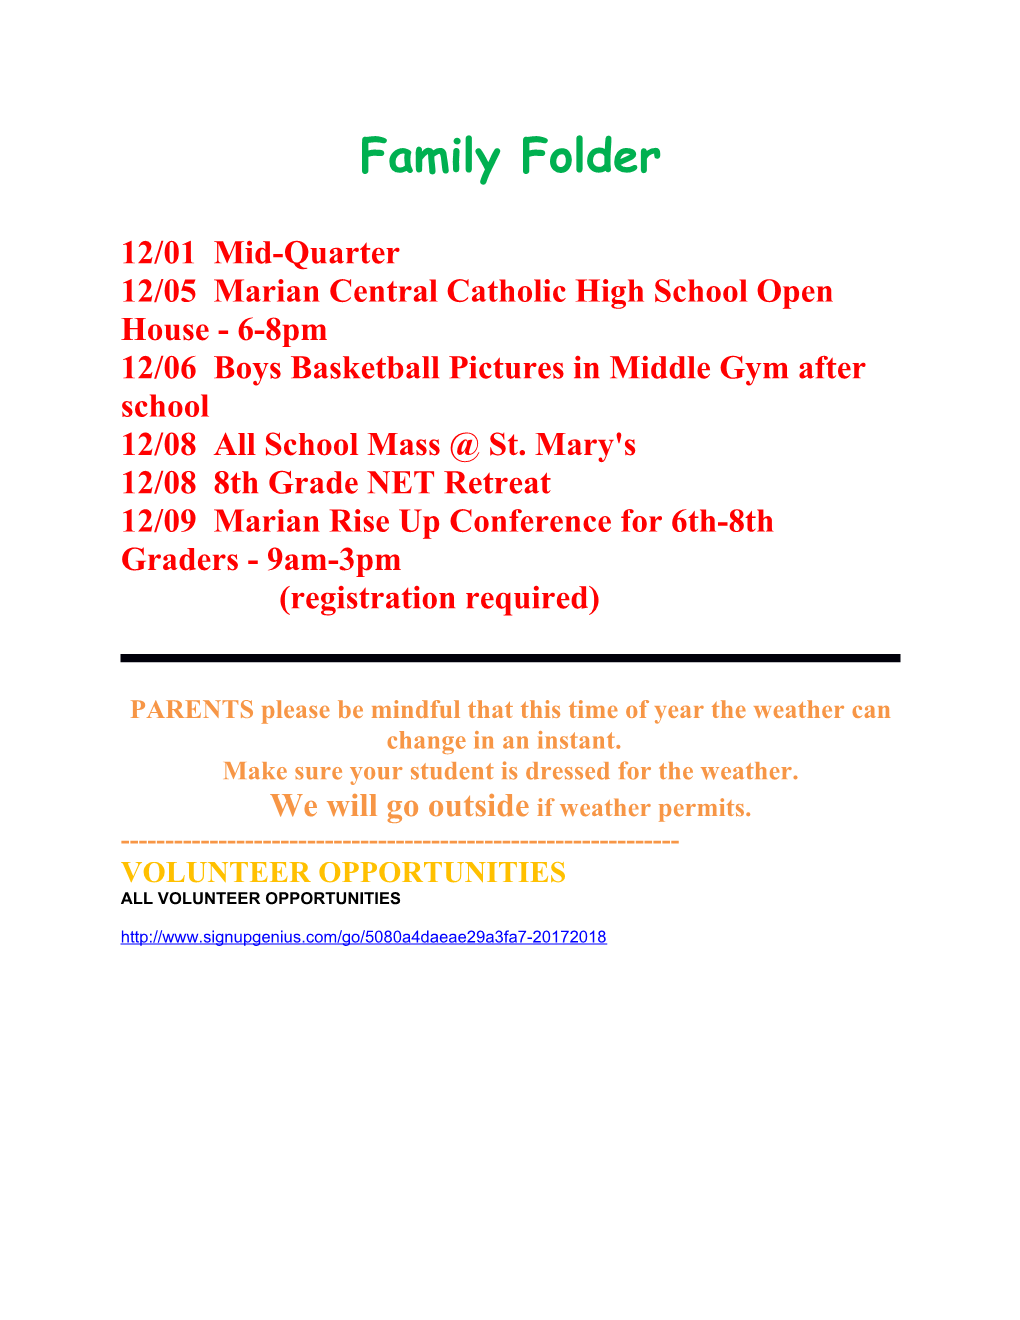 12/06 Boys Basketball Pictures in Middle Gym After School